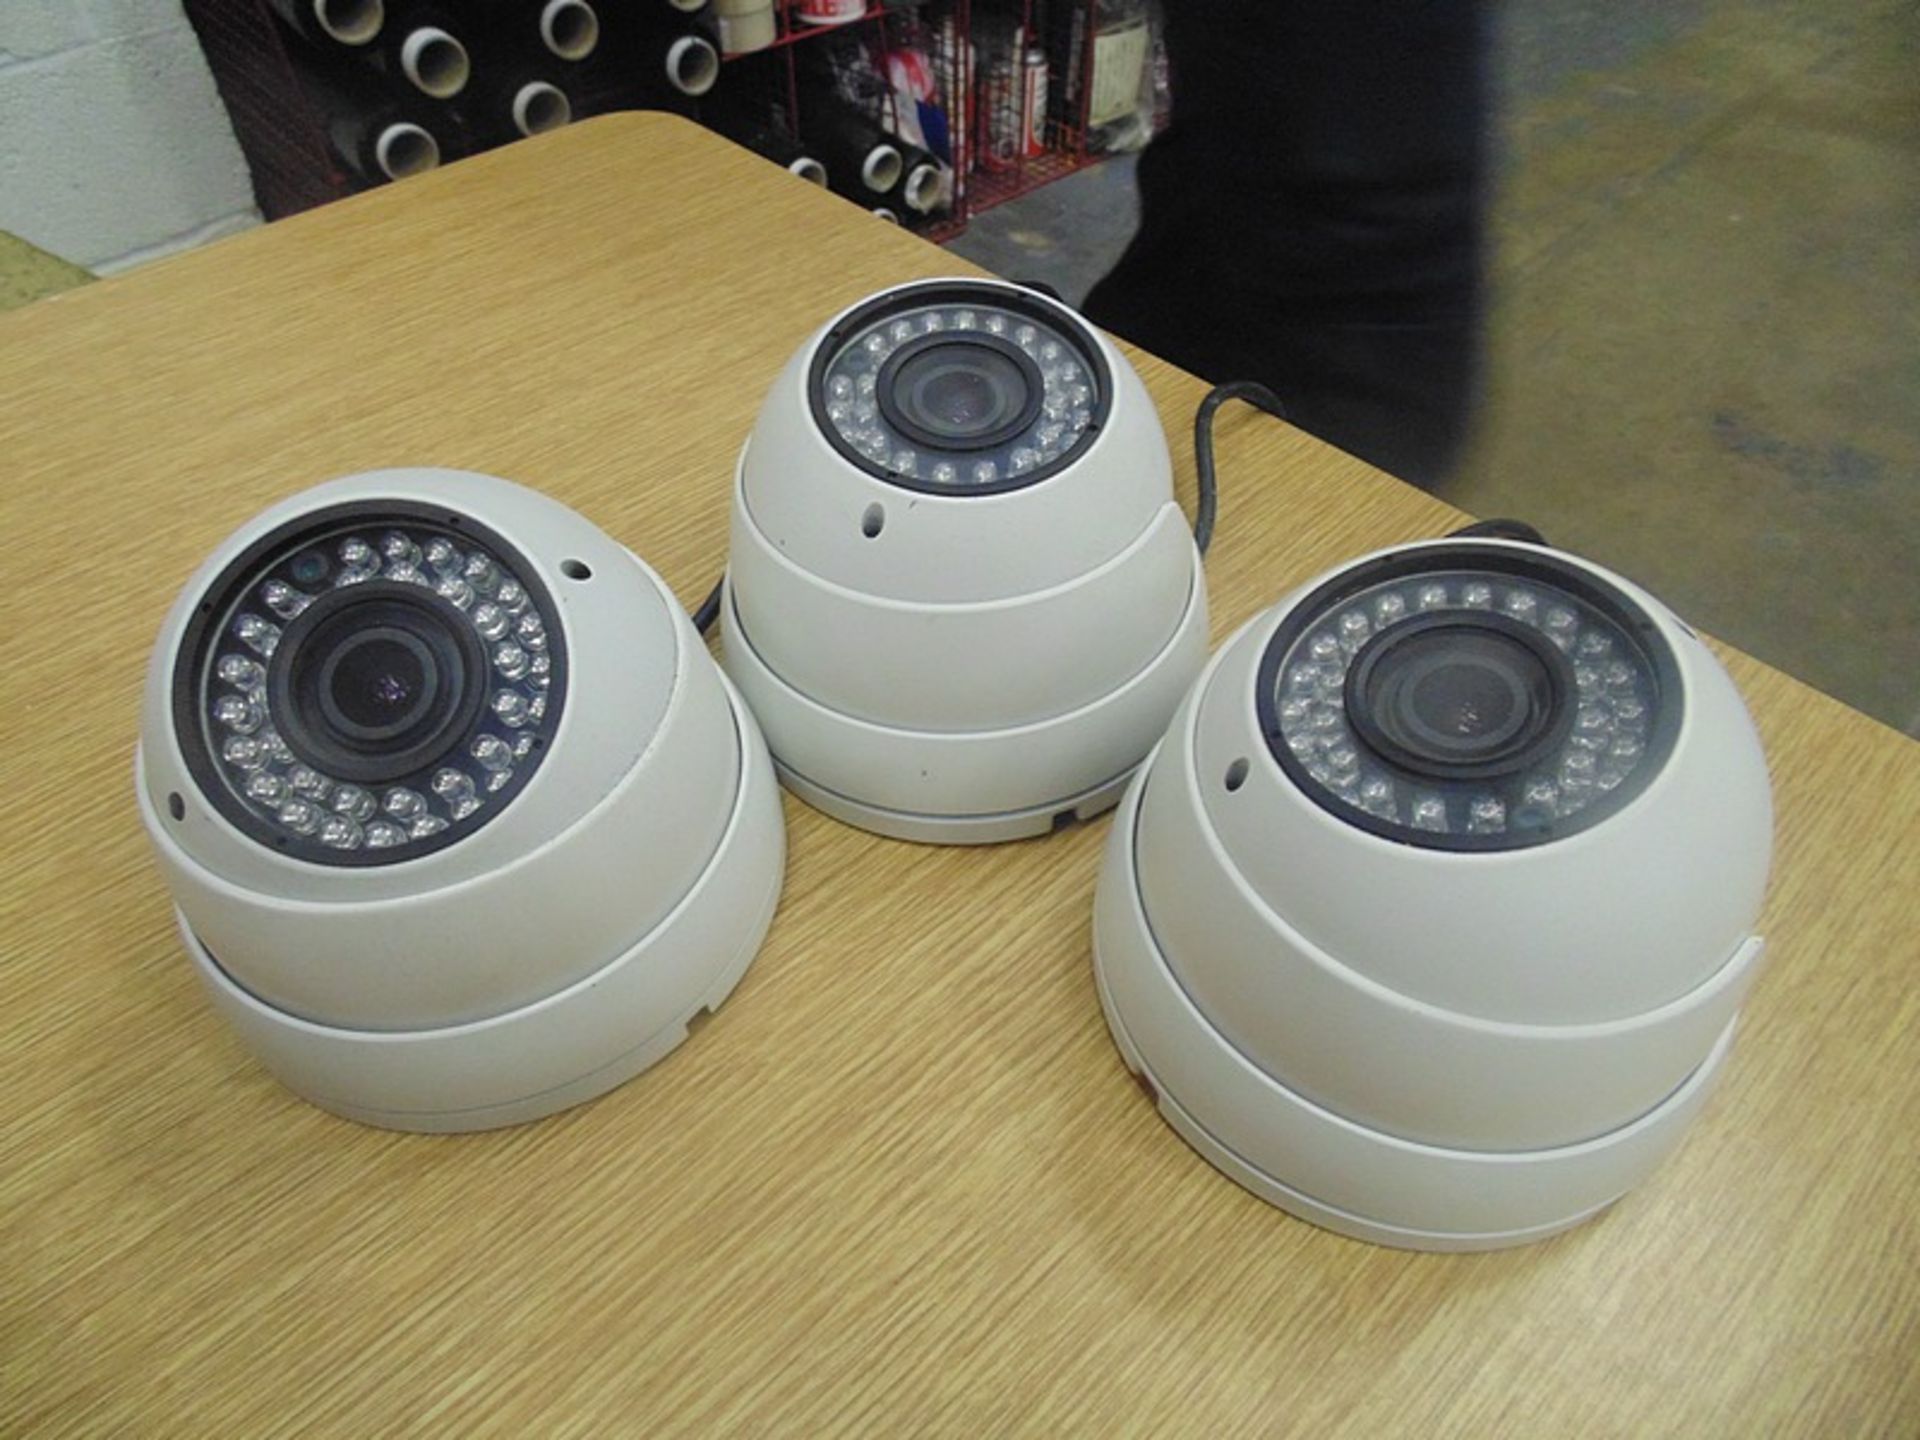 3 x DSIRHRV OEM VR Dome cameras IR Dome 4-9mm VF 1/3" DN 600tvl 12V Designed for areas that are